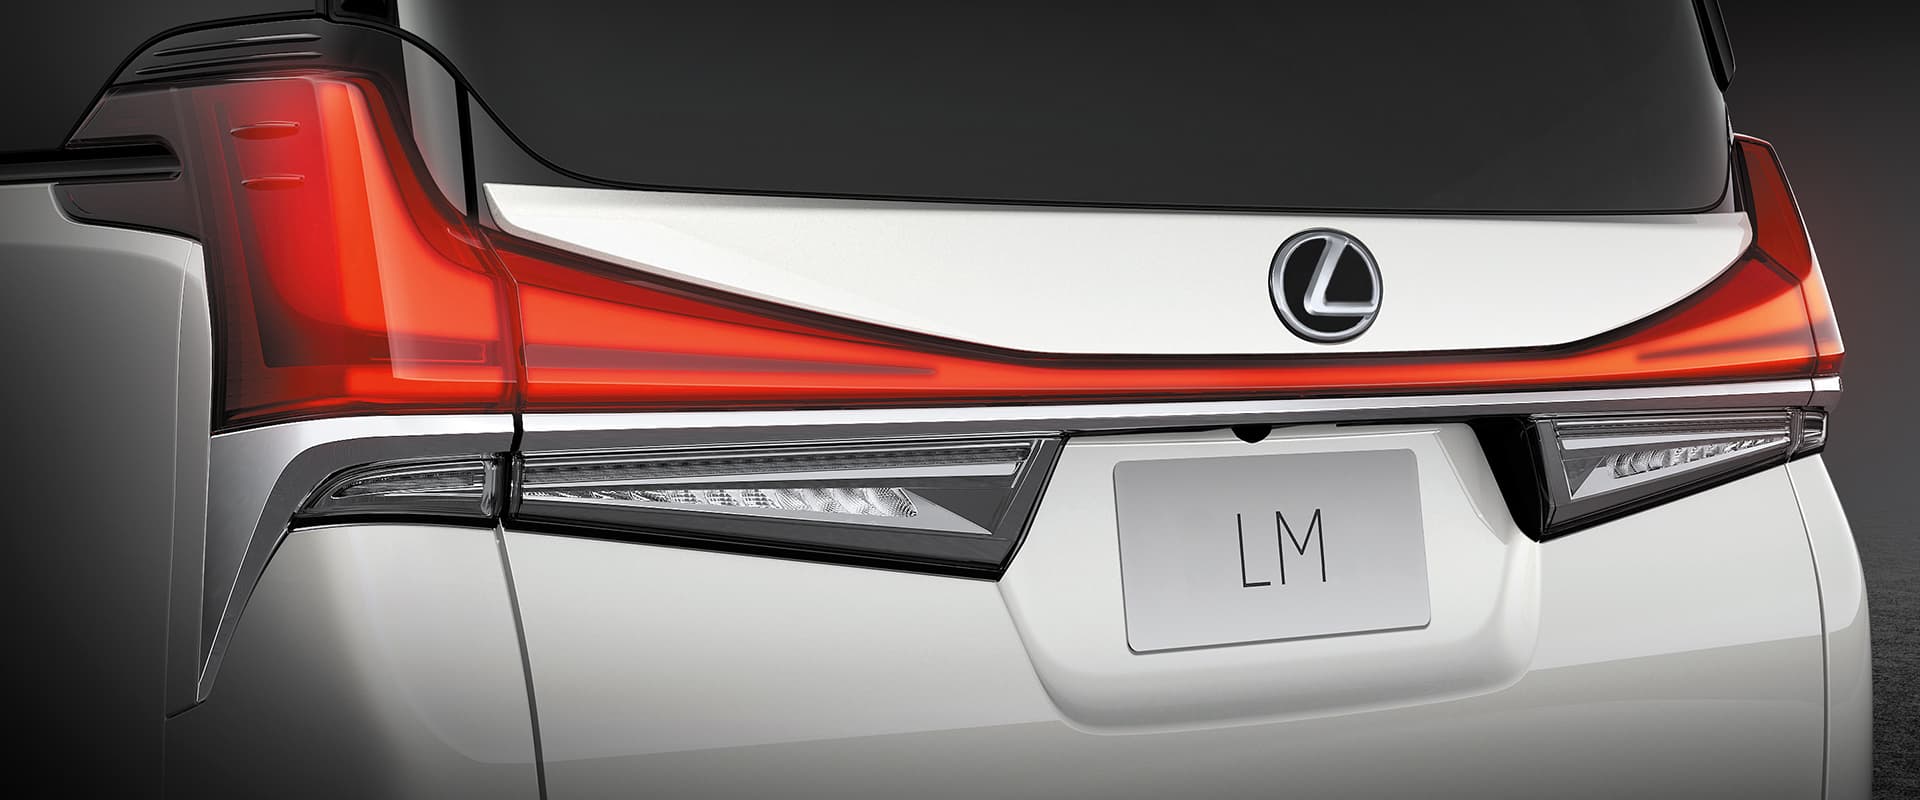 New Lexus LM Ultra-Luxurious MPV Makes Official Debut - Looks Fantabulous! - back